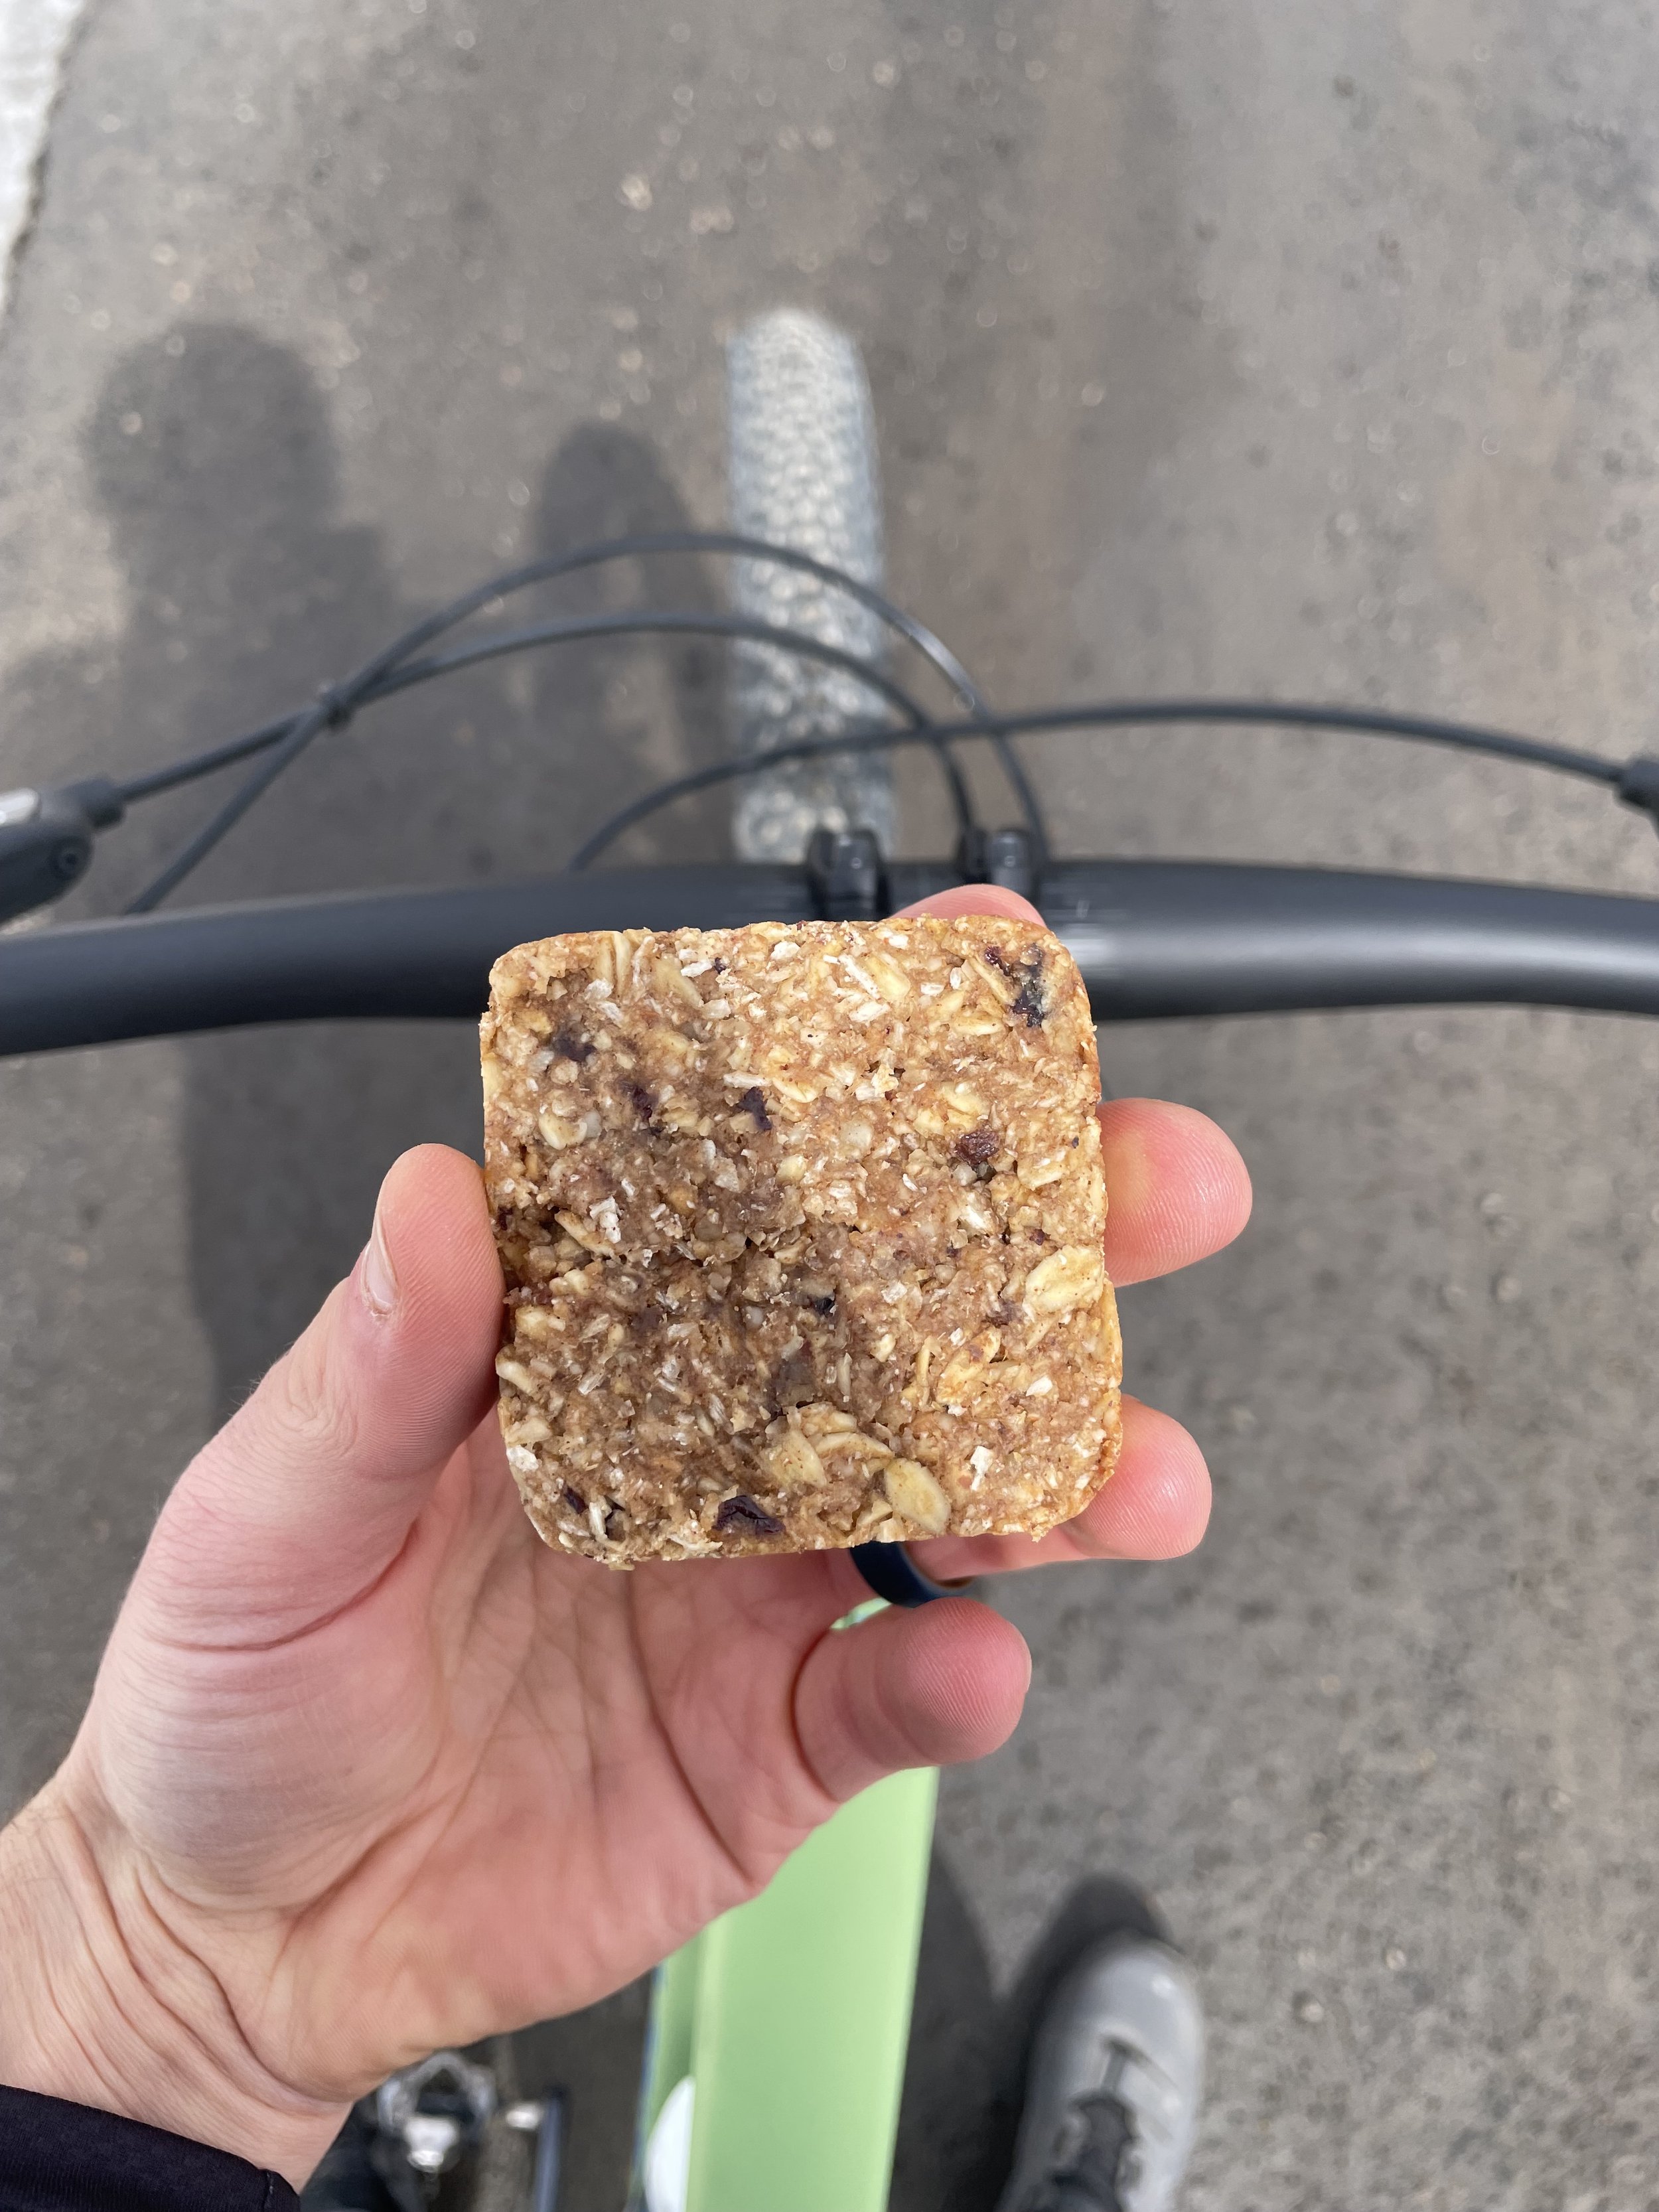 During Ride Snack